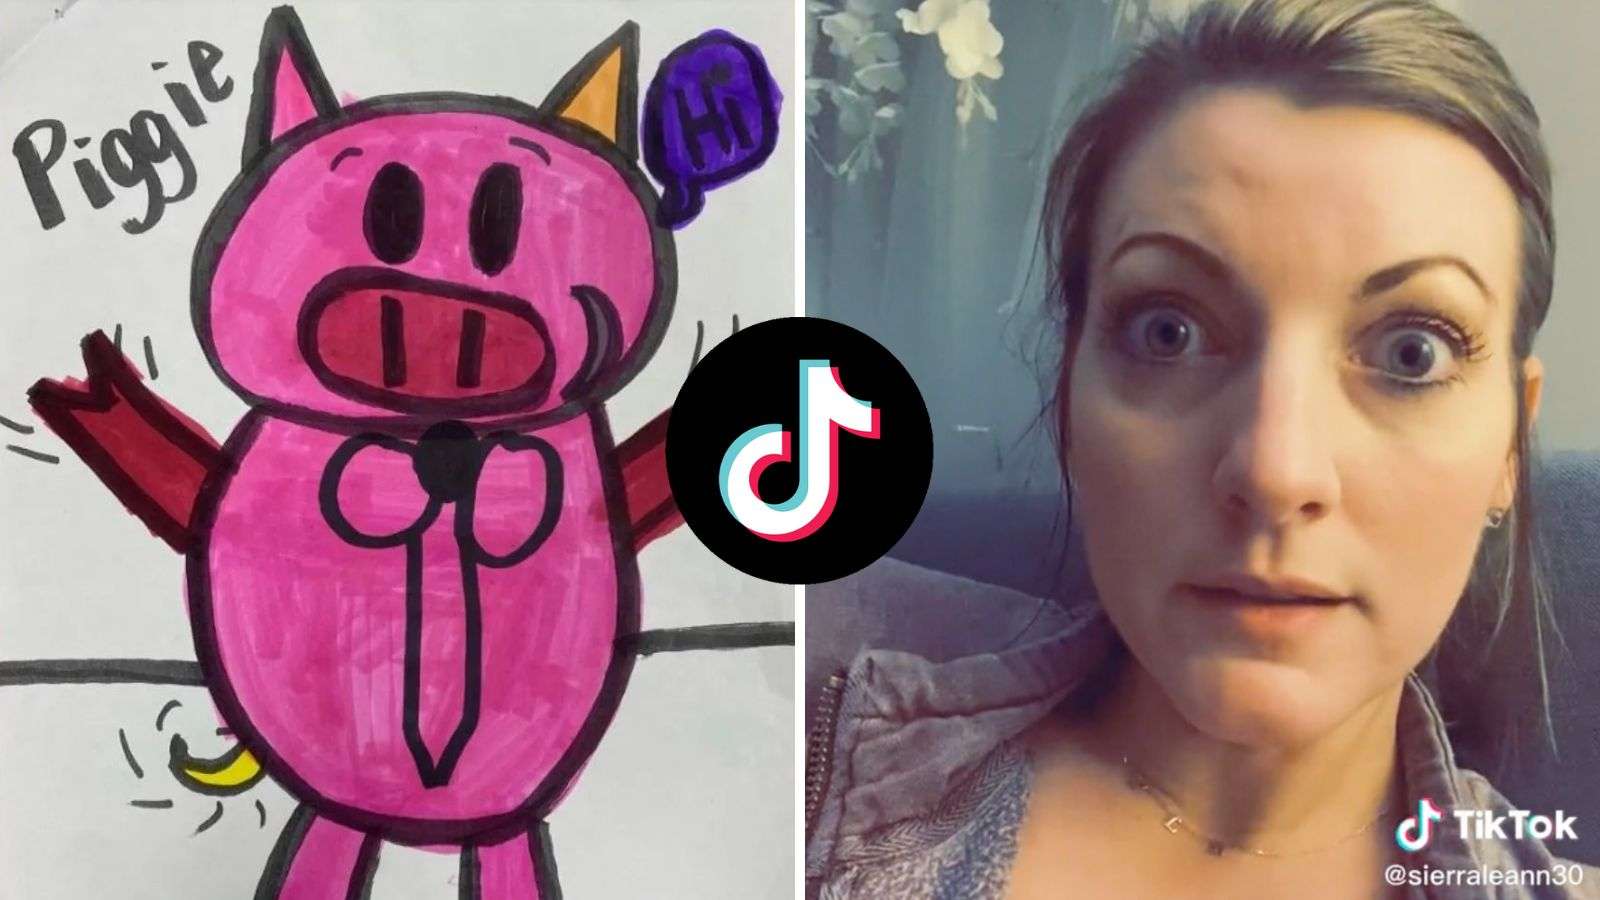 Mom outraged after school confiscates daughter's pig drawing for being "inappropriate"